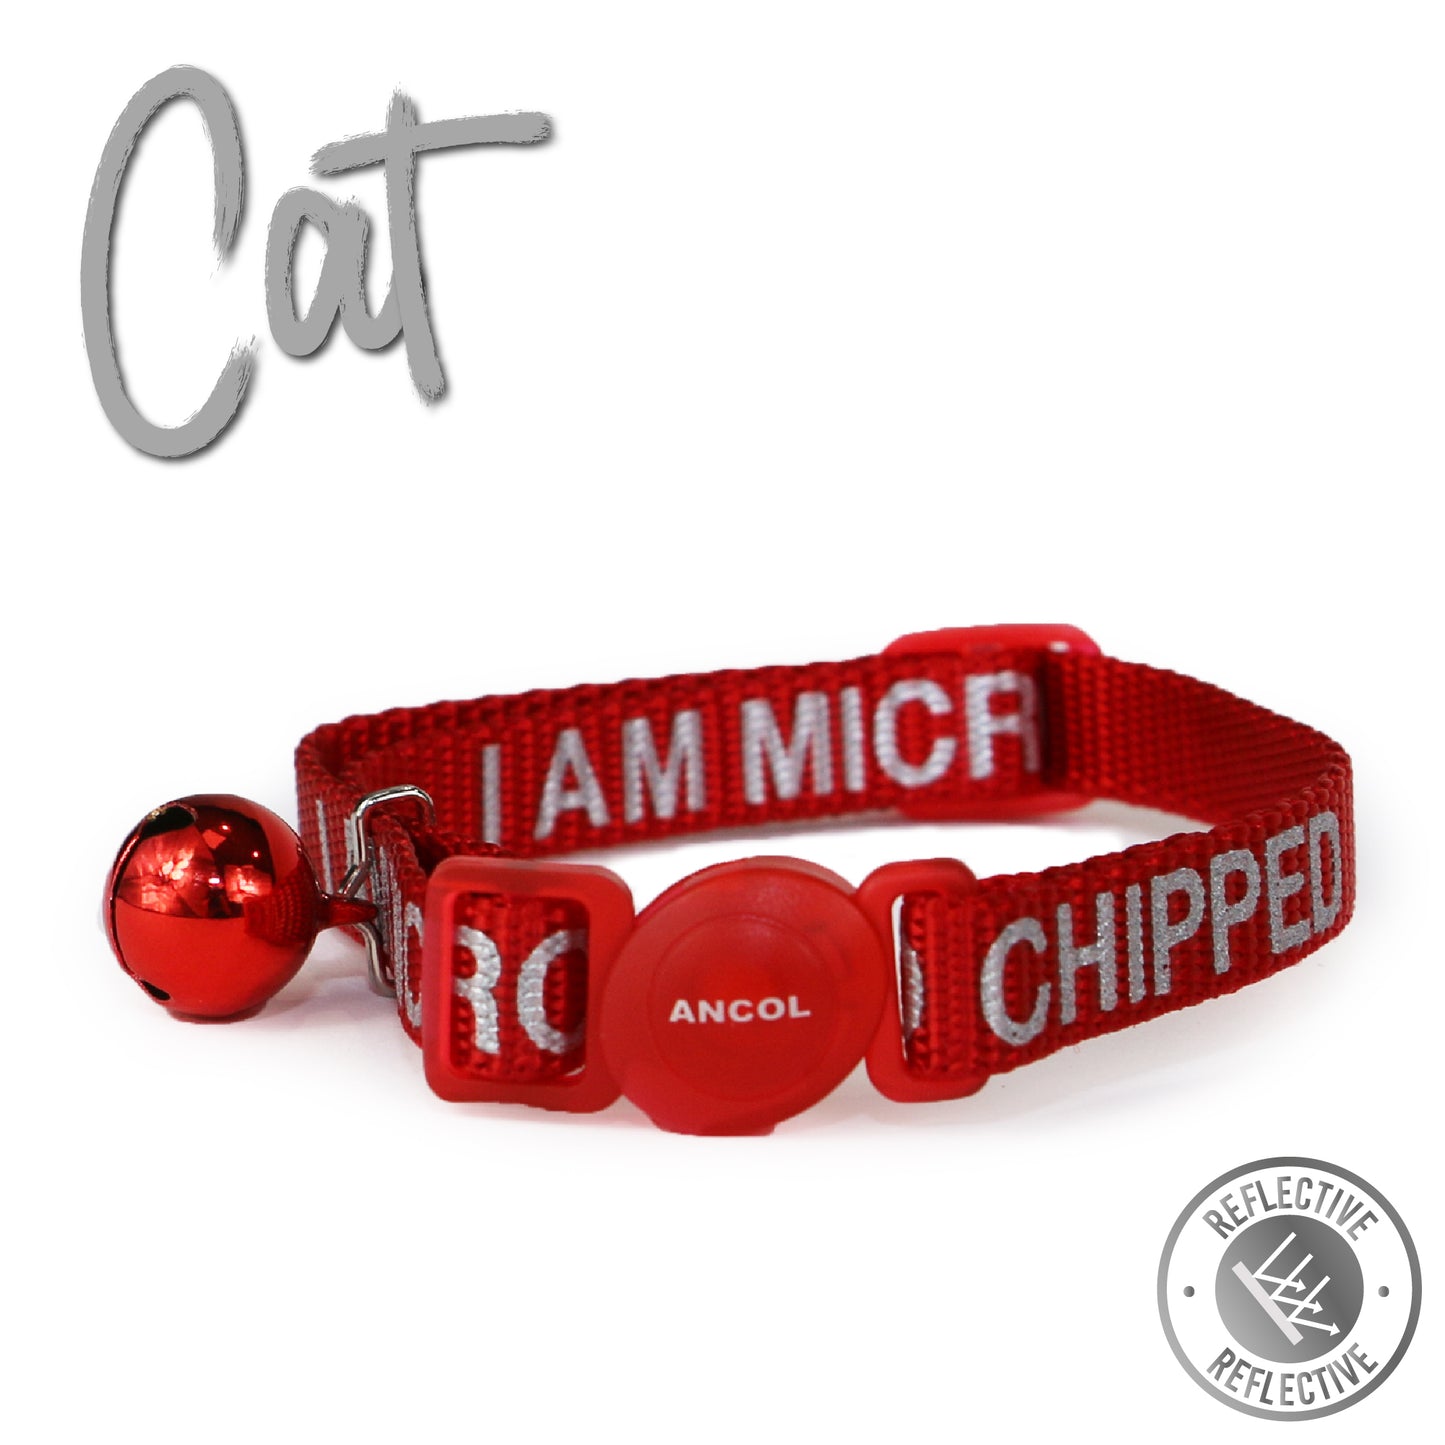 Ancol Reflective Safety Cat Collar With Bell - Red With 'I Am Micro Chipped' Printed